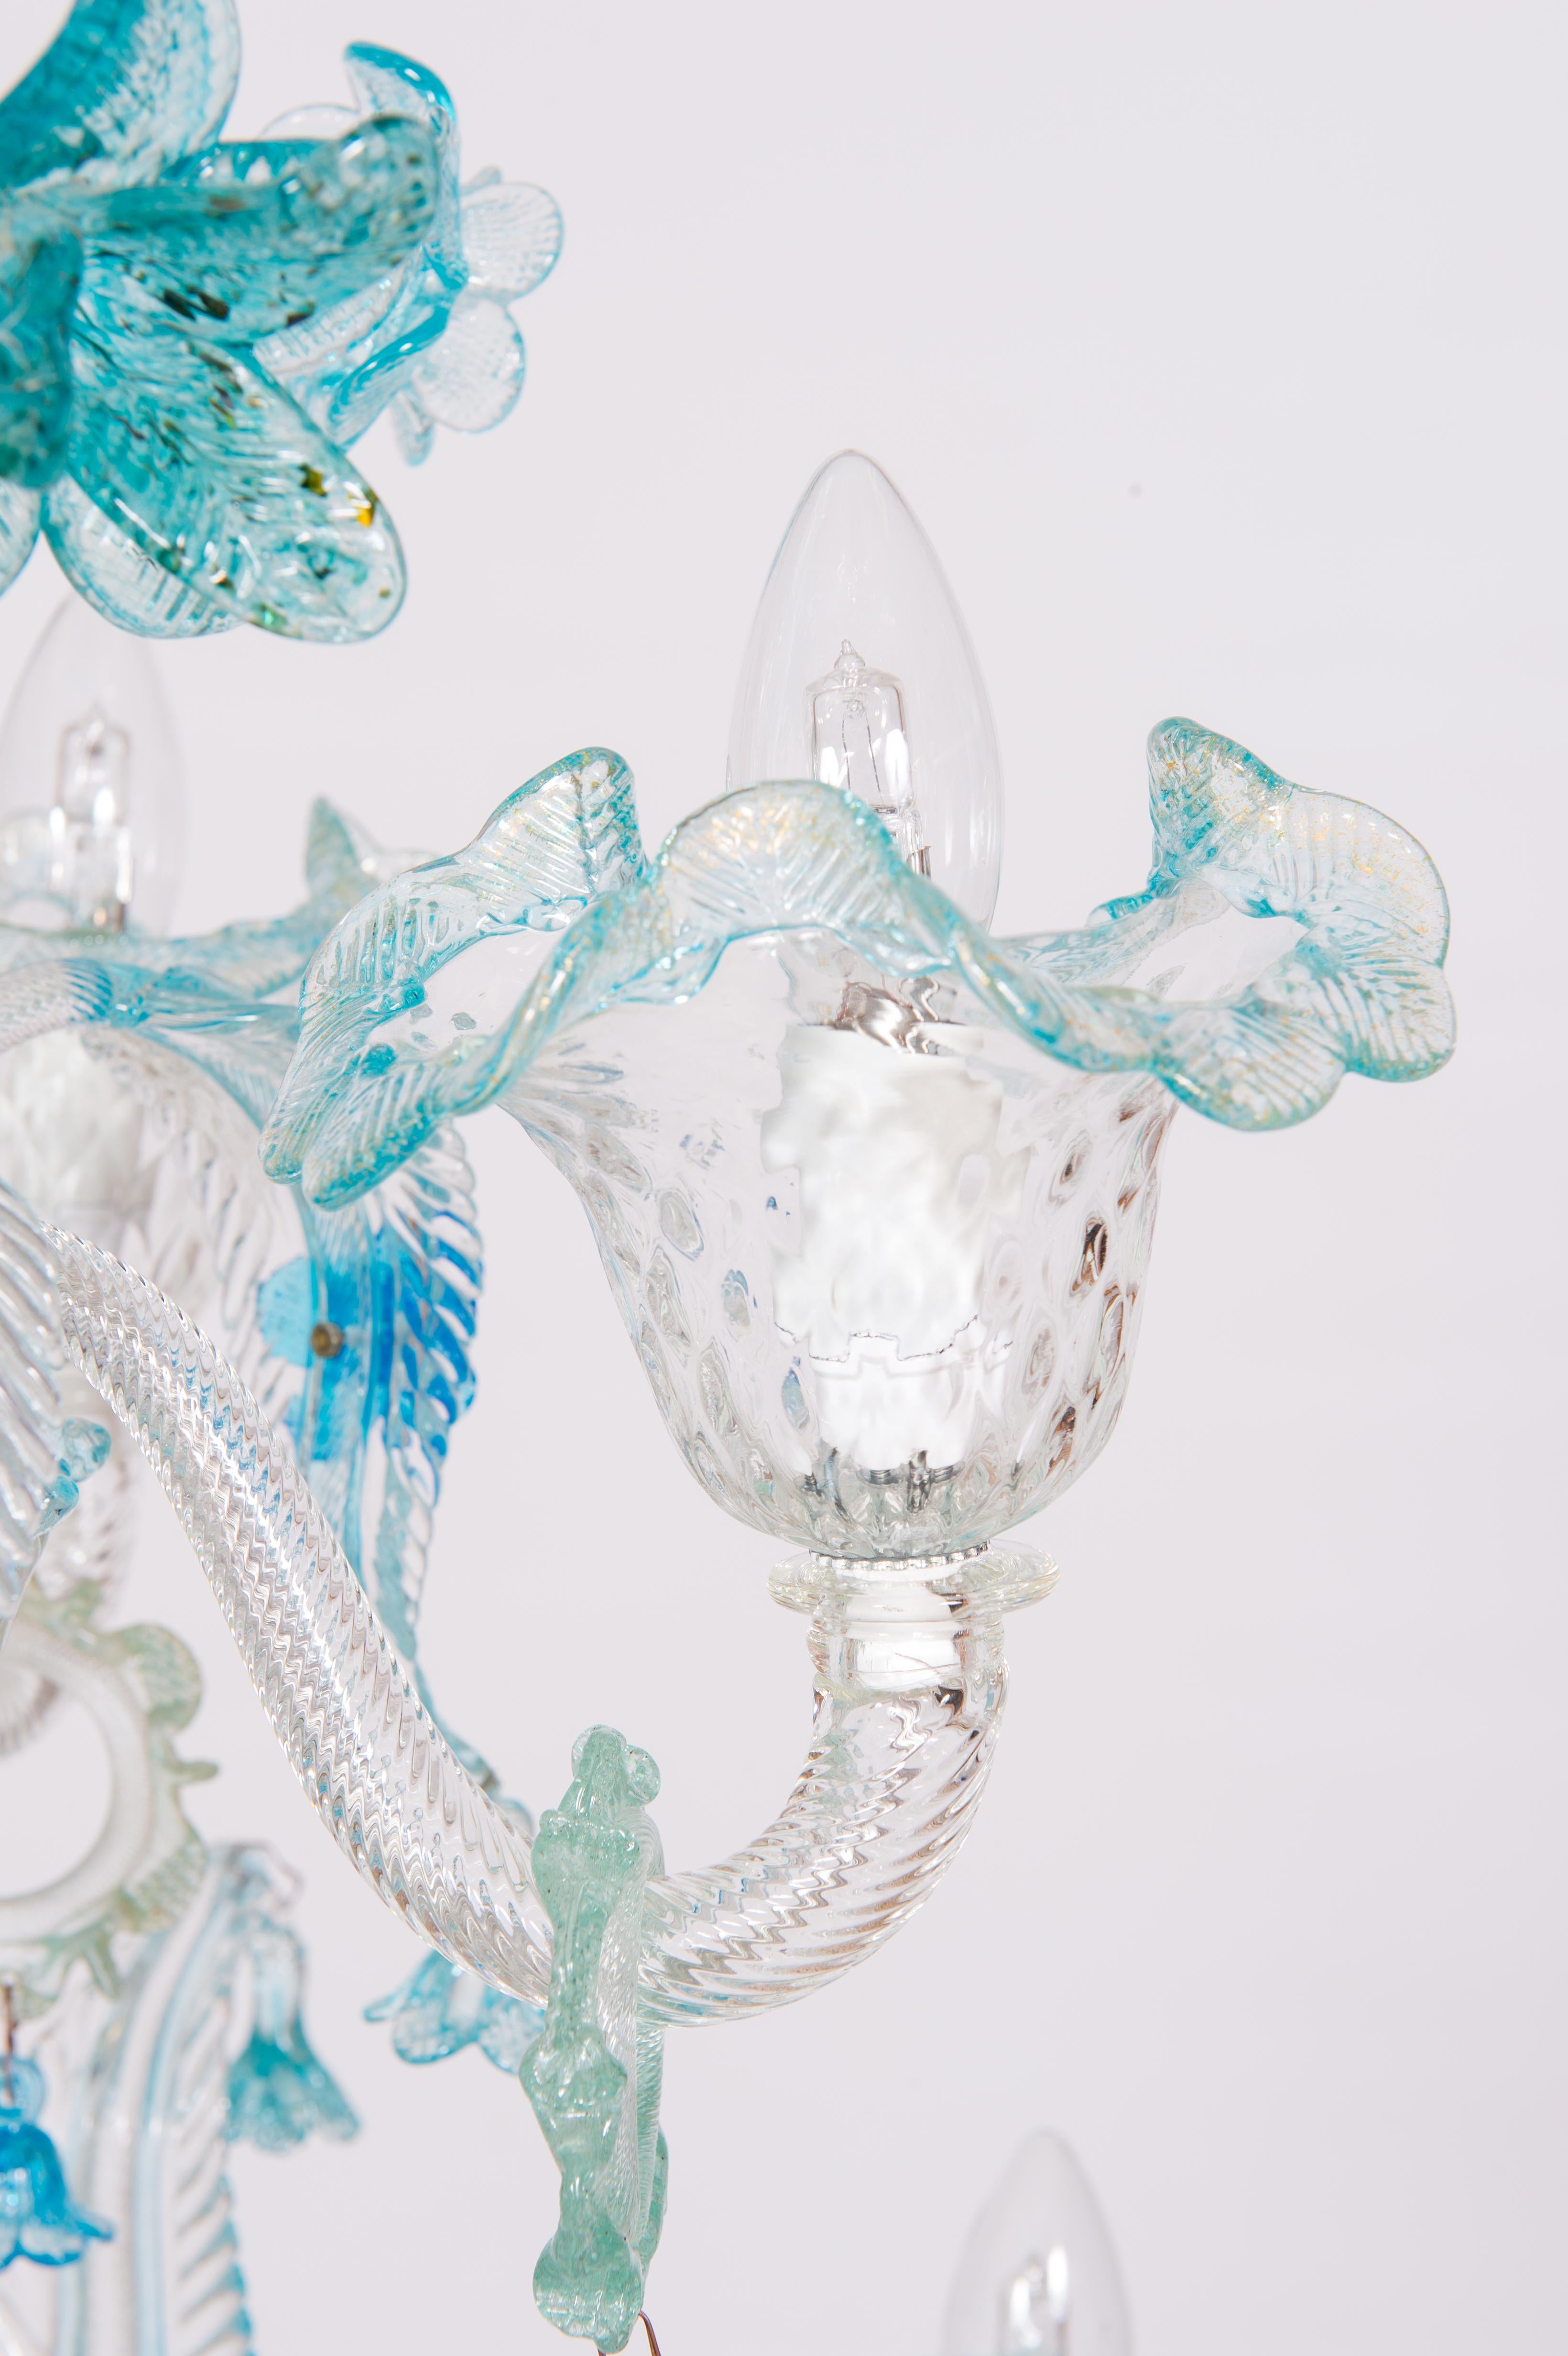 Double Tiered Murano Glass Chandelier in vivid Blue Floral Patterns 1990s Italy For Sale 11